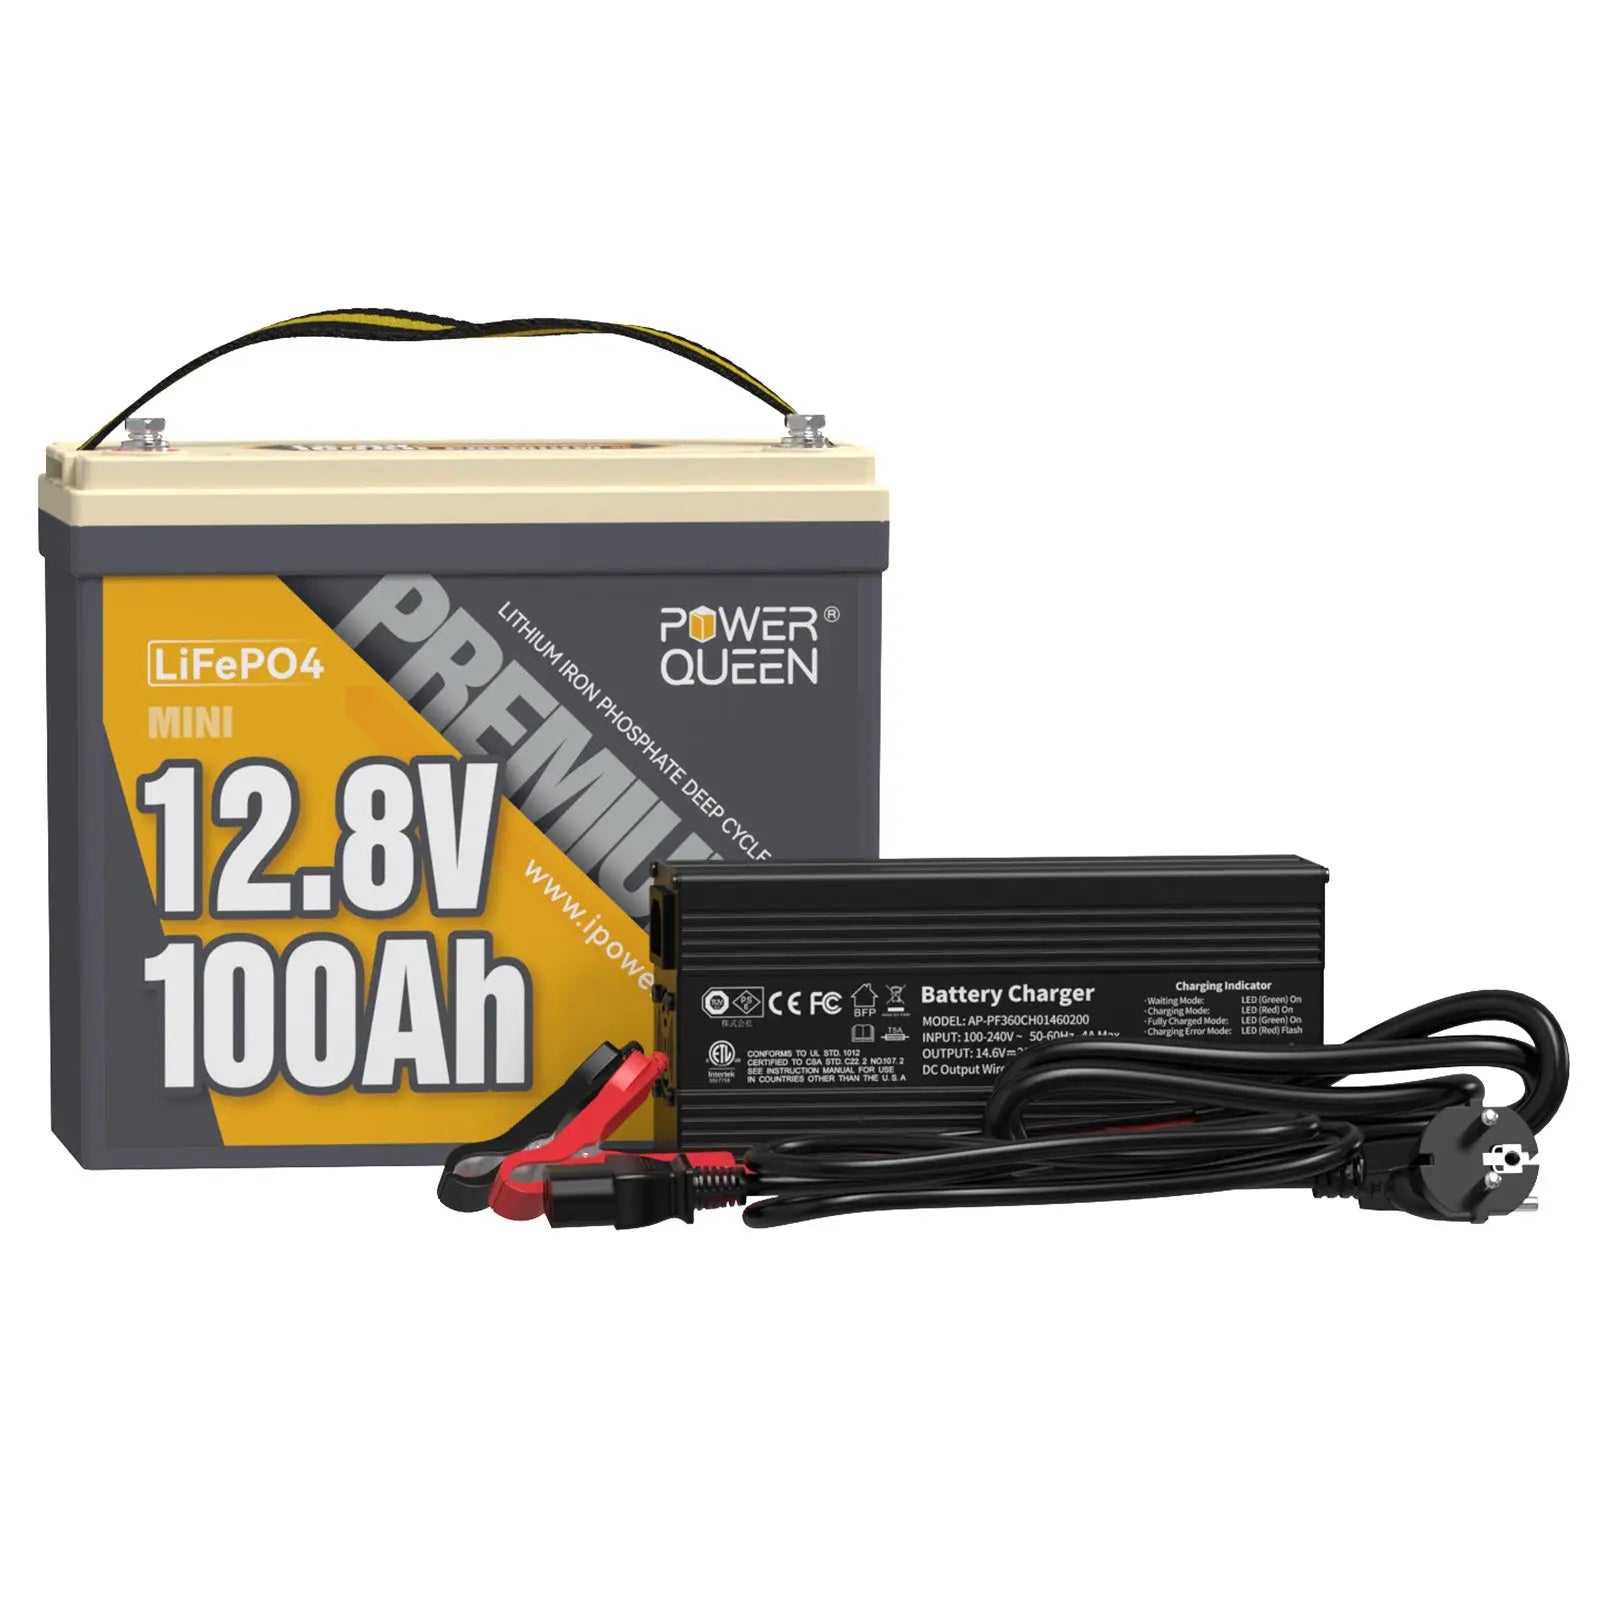 Power Queen 12V 20A Charger Kit With 12V 100Ah Mini Deep Cycle Lithium Battery Power Queen